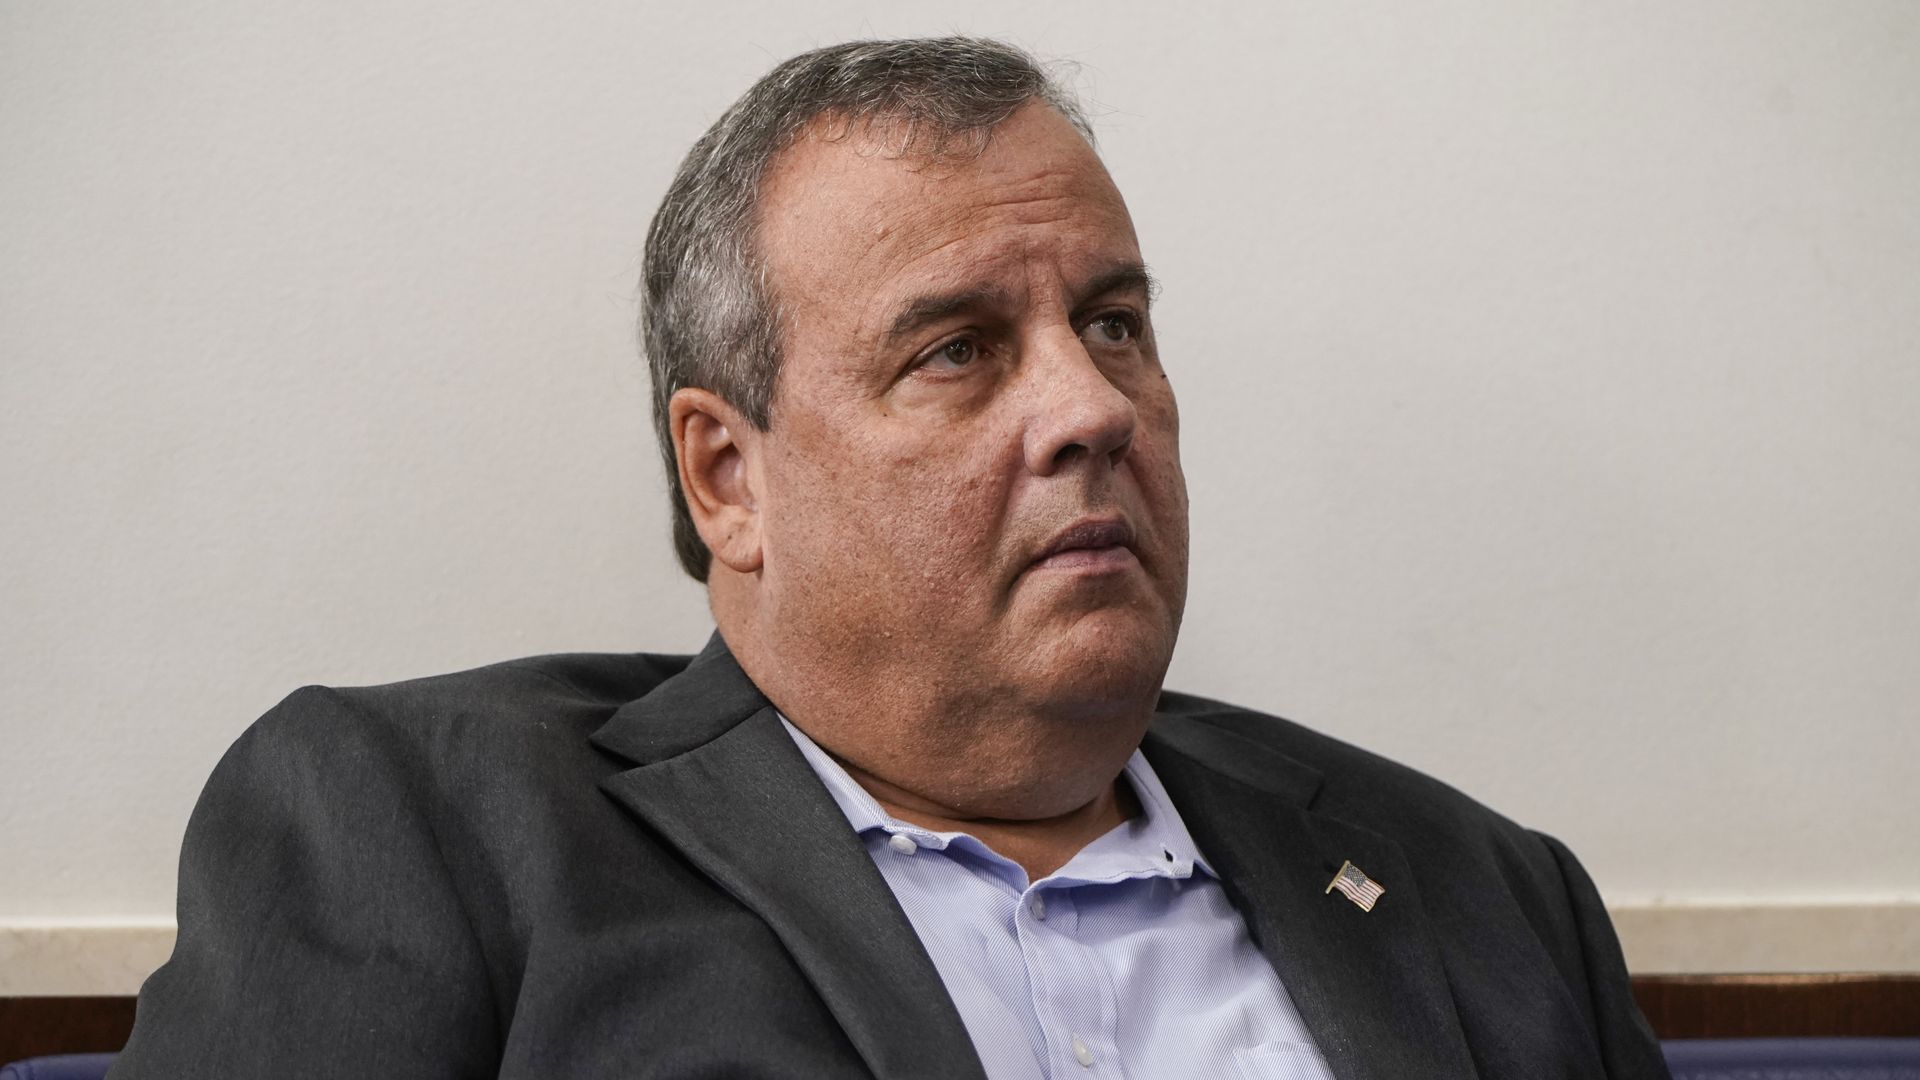 Chris Christie wears a polo and blazer in the White House 